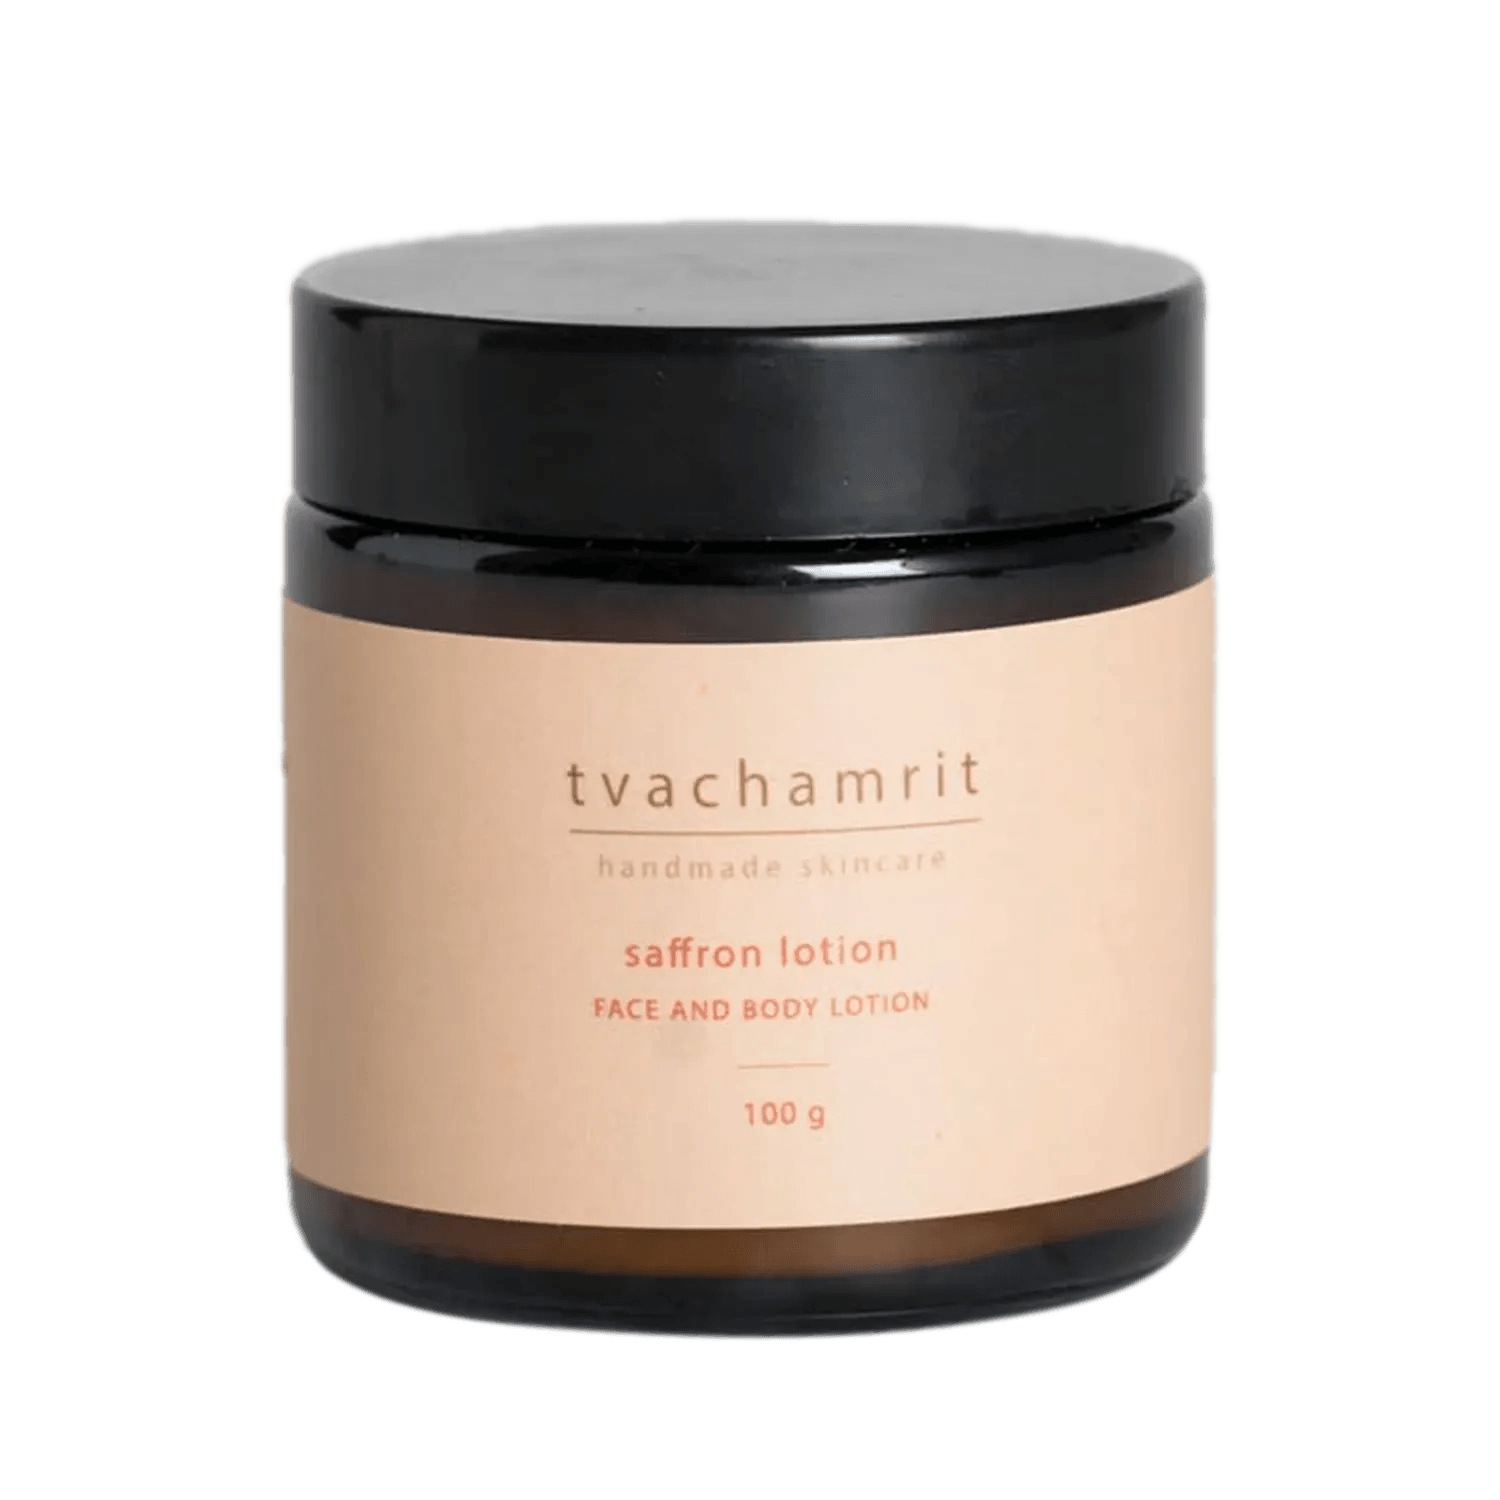 Tvachamrit Handcrafted Skincare | Tvachamrit Handcrafted Skincare Saffron Lotion (100g)